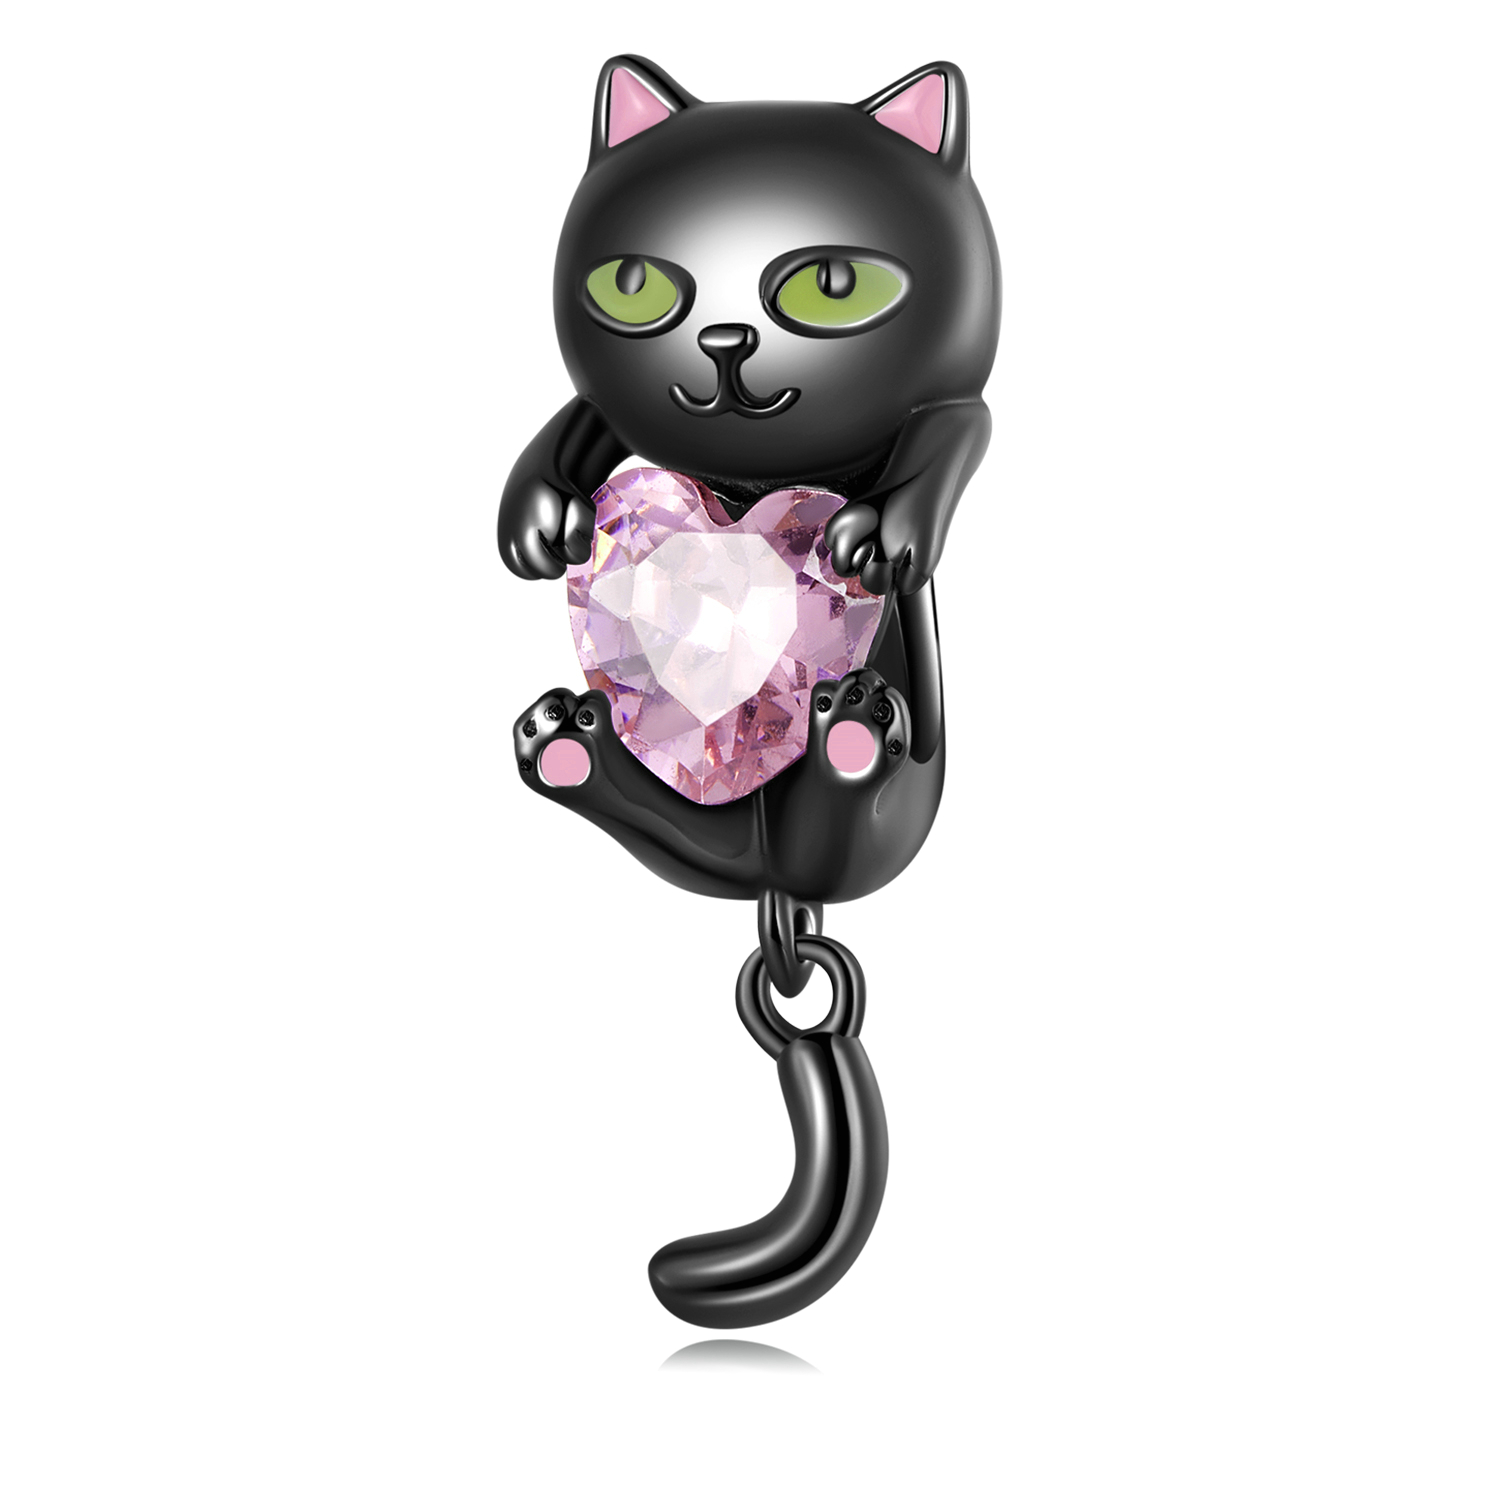 Black Cat Embraces Heart Gemstone Sterling Silver Charm Bead